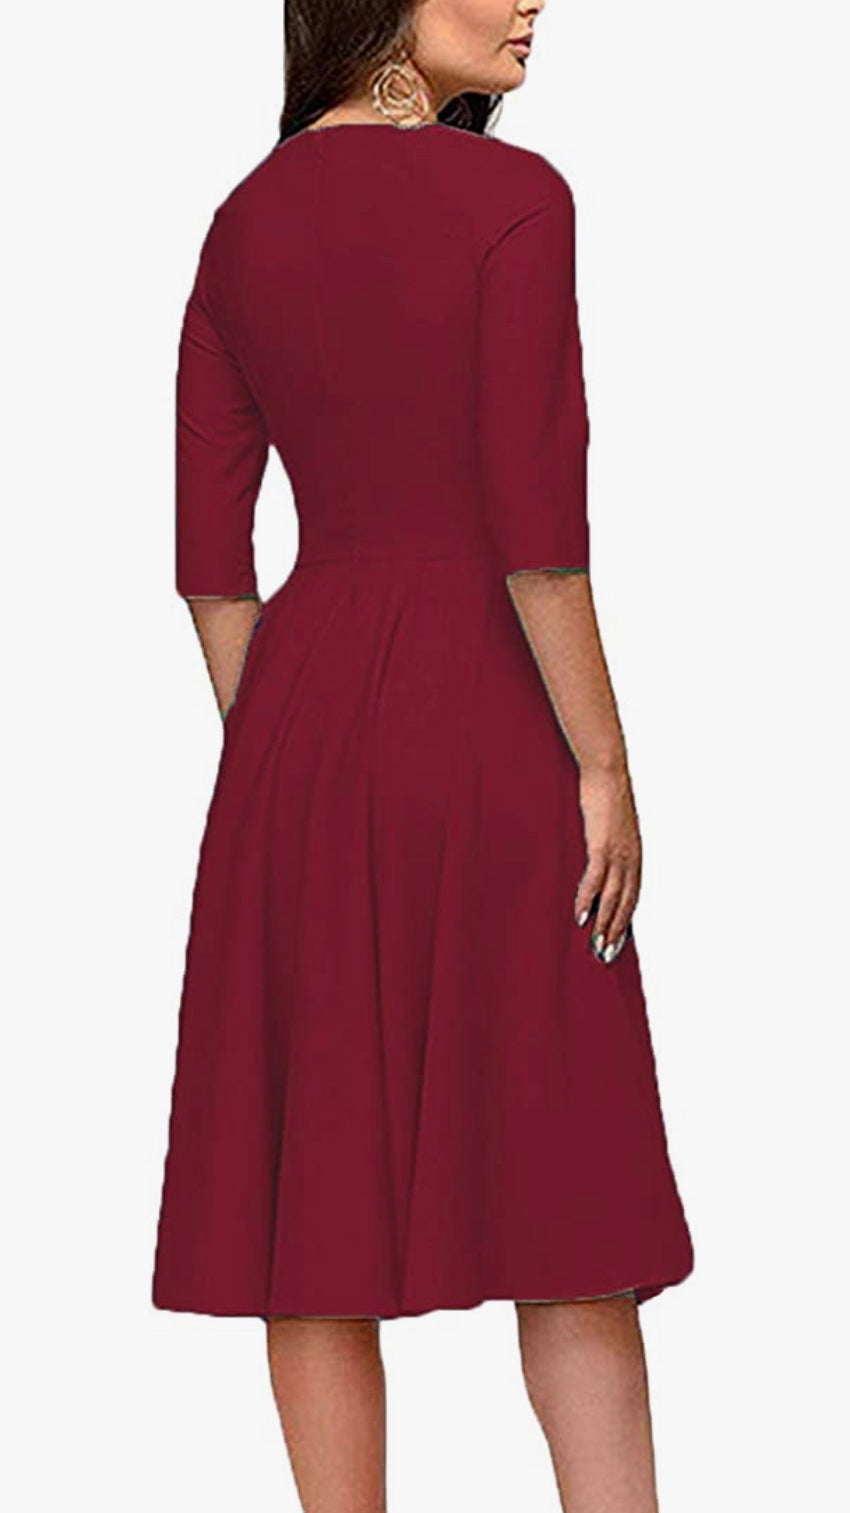 Elegant Audrey Hepburn Style Ruched 3/4 Sleeve Casual Swing A-line Dress (Red)